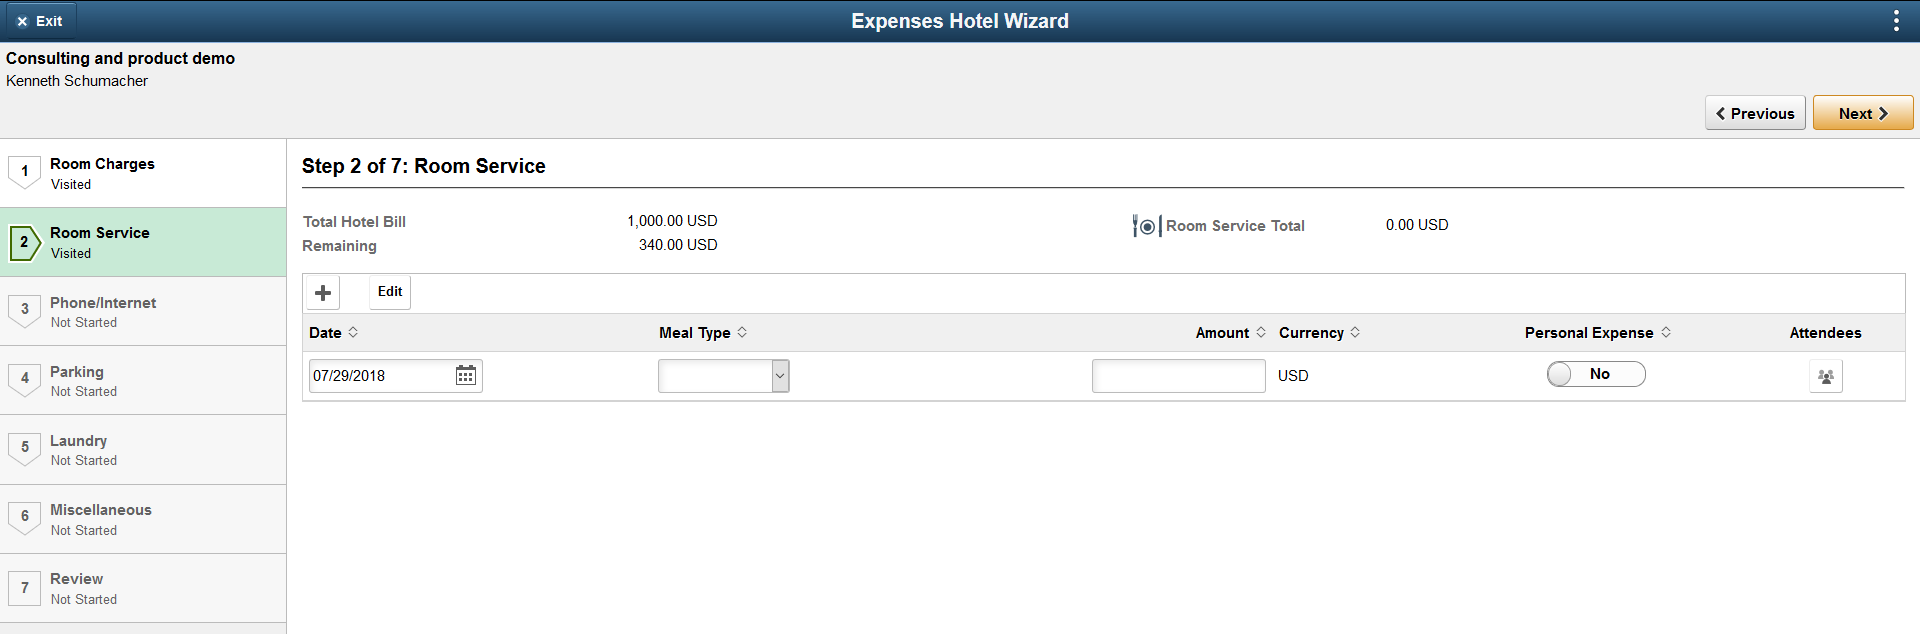 Expenses Hotel Wizard activity guide